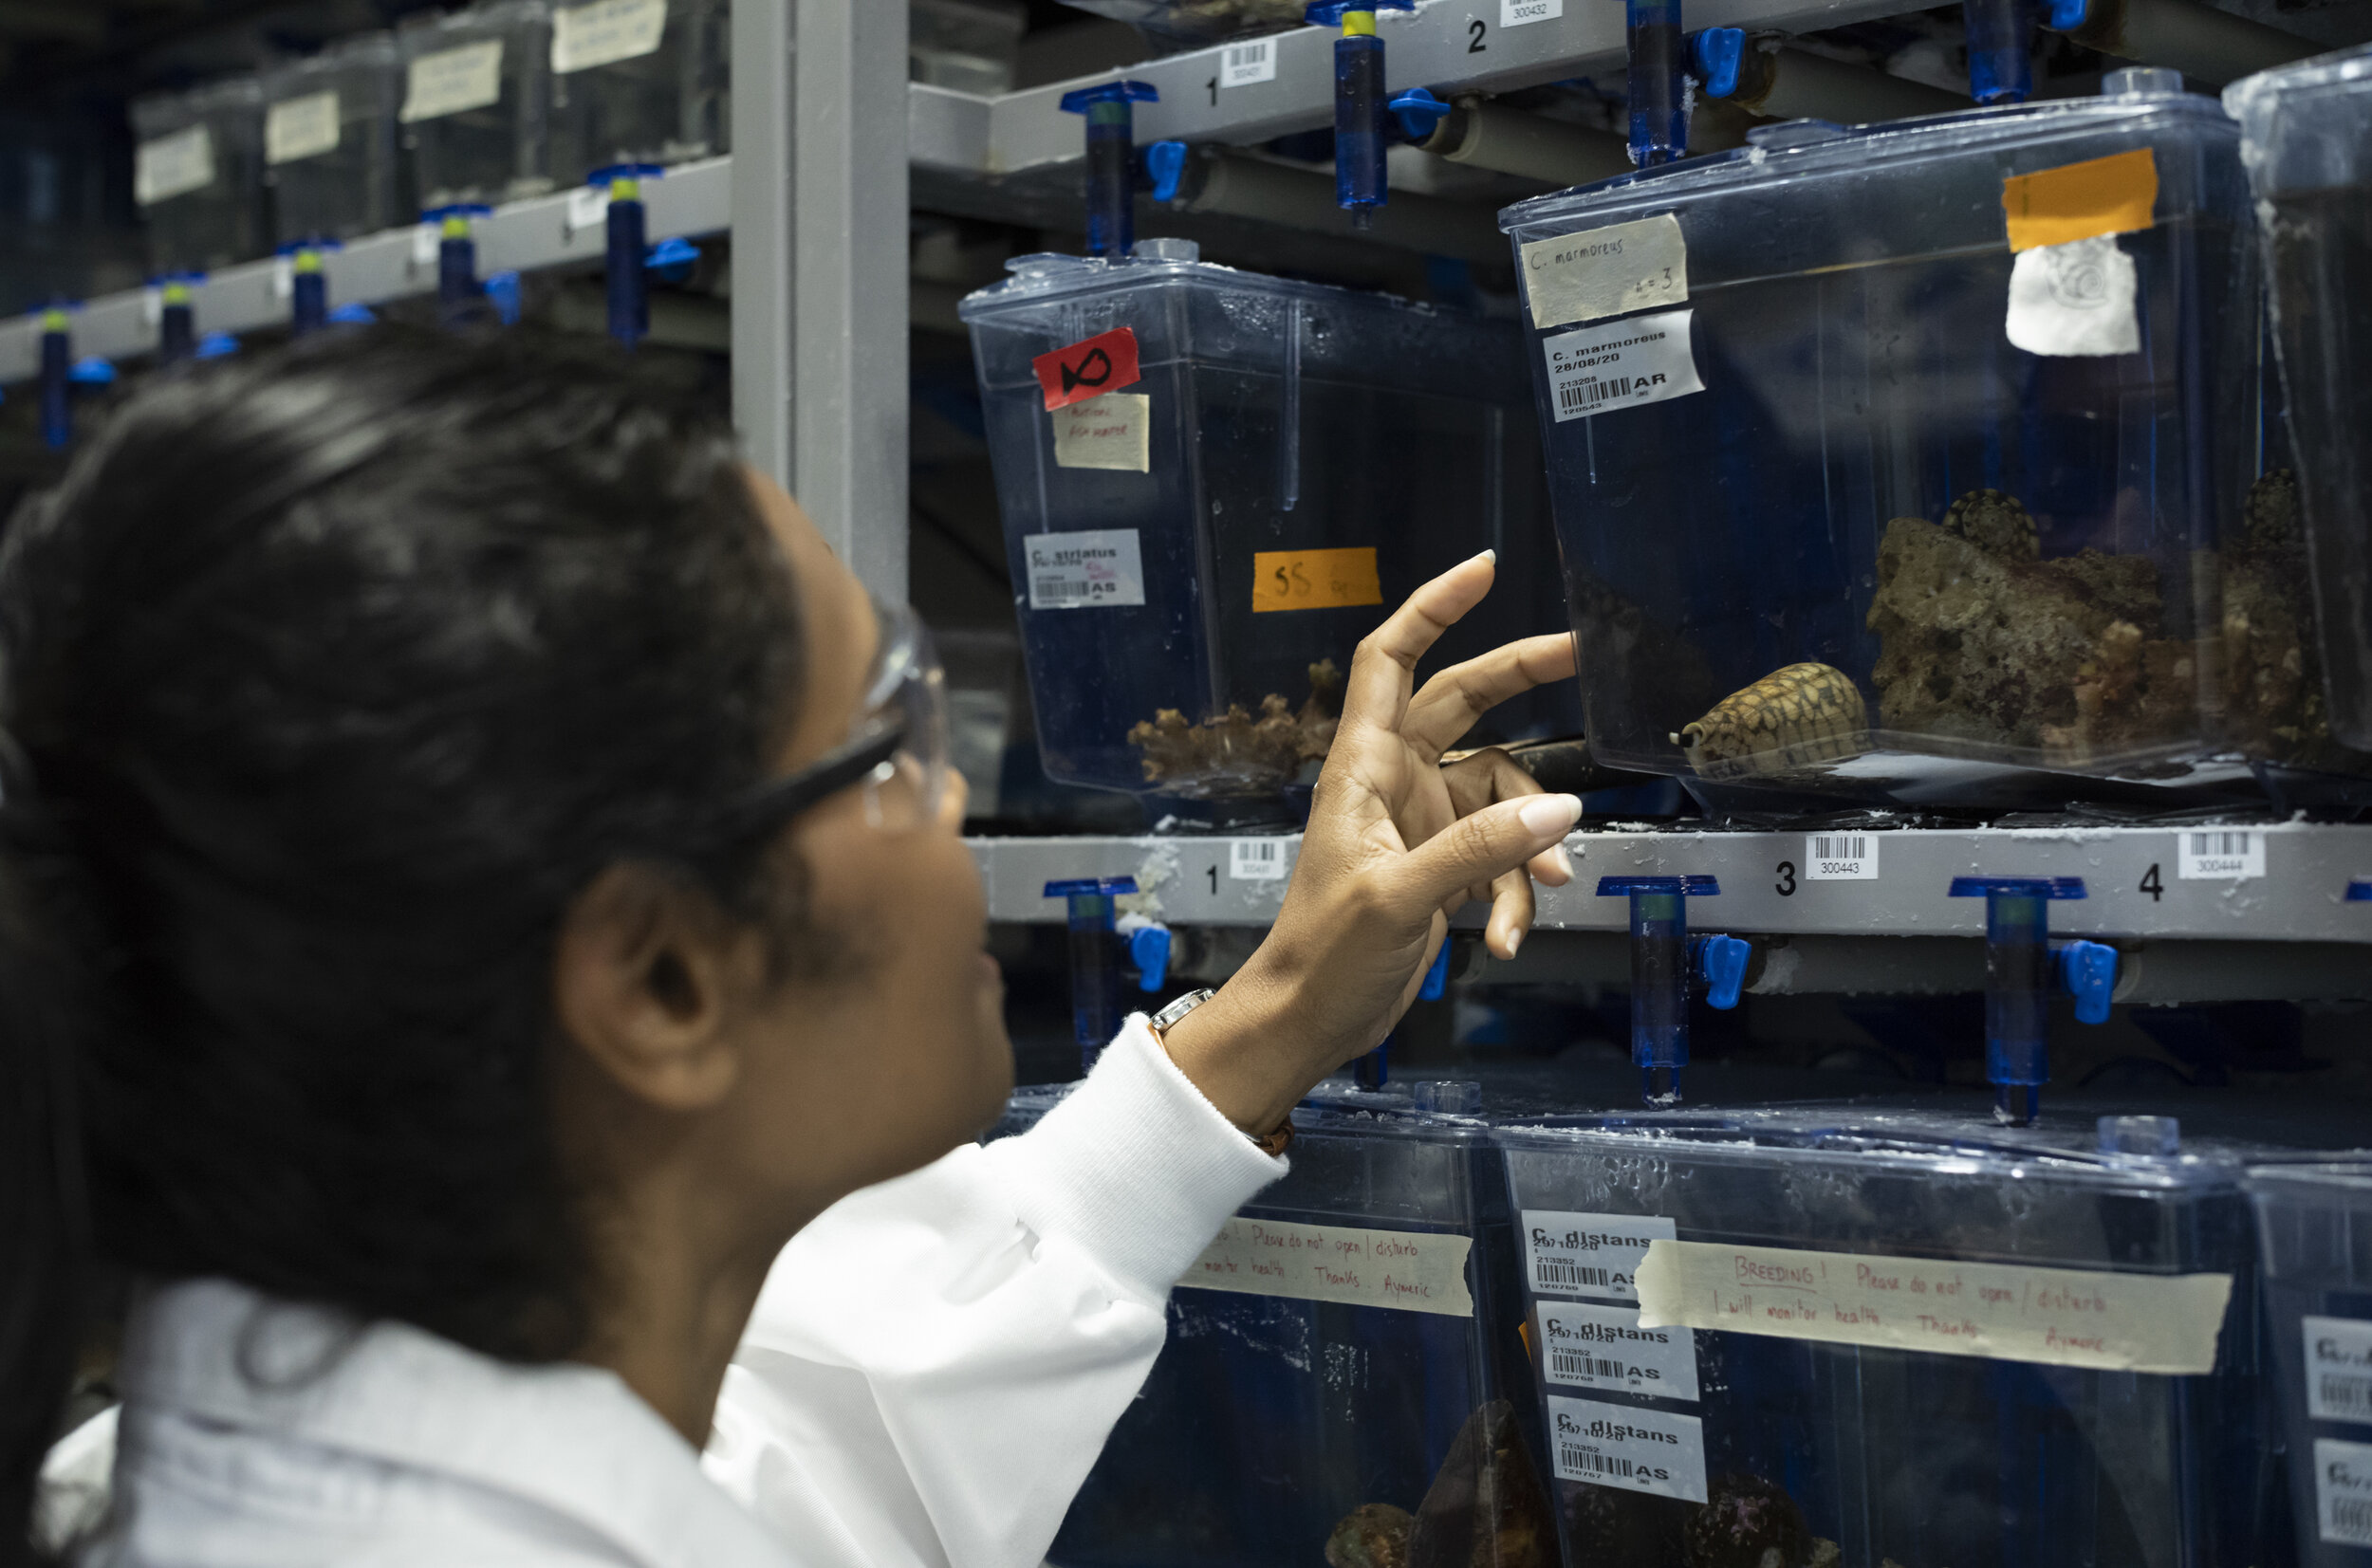  Post Doctorate Researcher Himaya Siddhihalu viewing the Marine Cone Snail in the Marine Aquarium , at Institute for Molecular BioscienceThe University of Queensland.Photography : Russell Shakespeare for Australian Geographic Magazine 